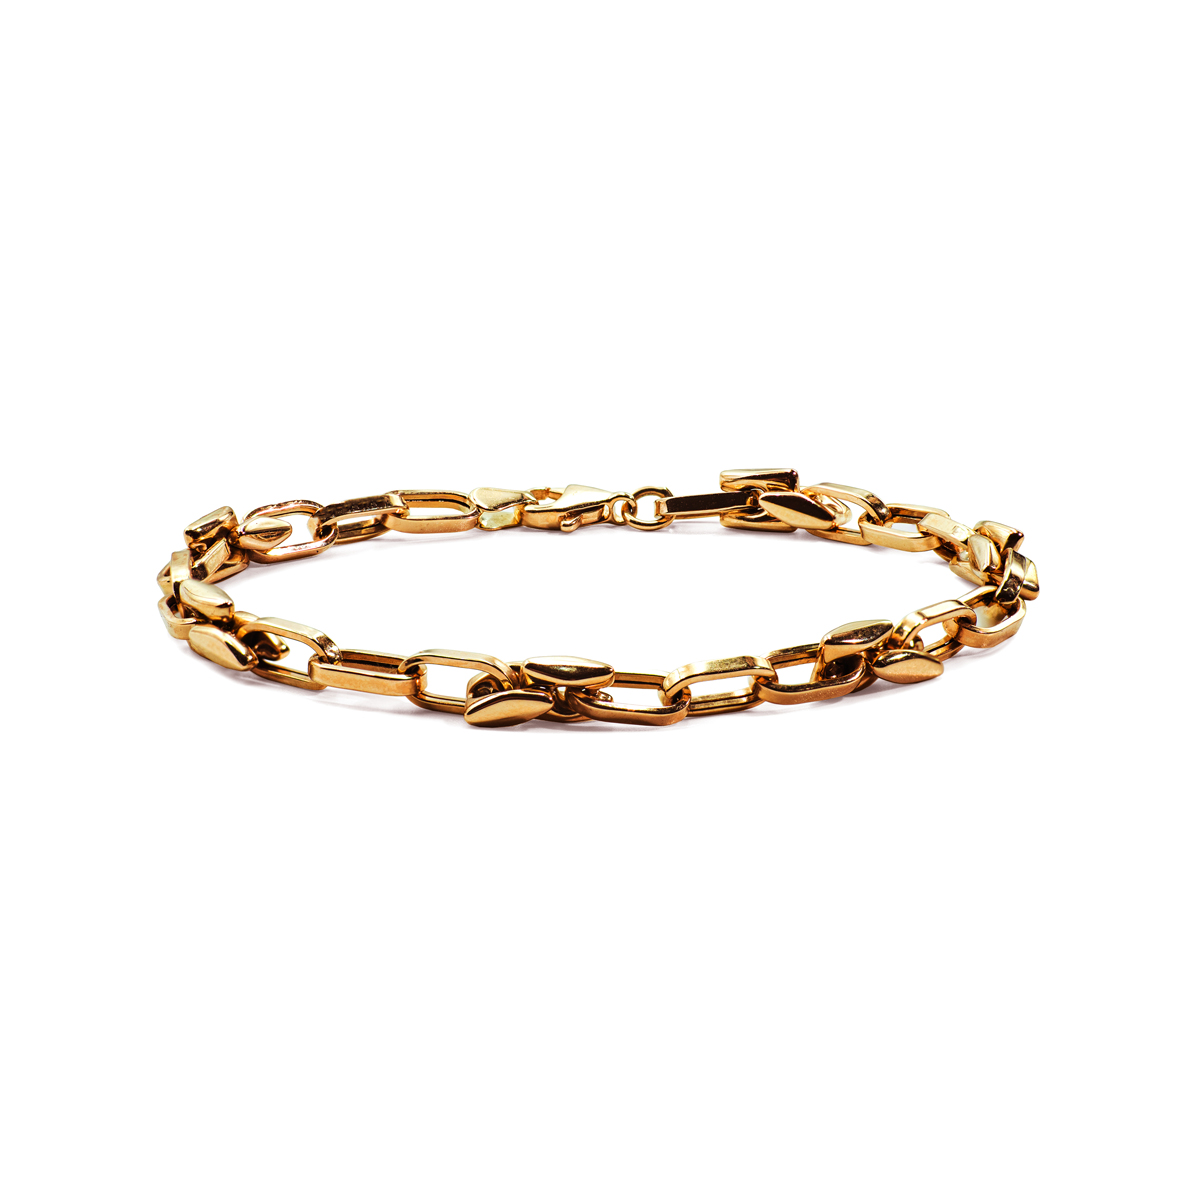 Elongated Chain Link Bracelet in 14k Yellow Gold